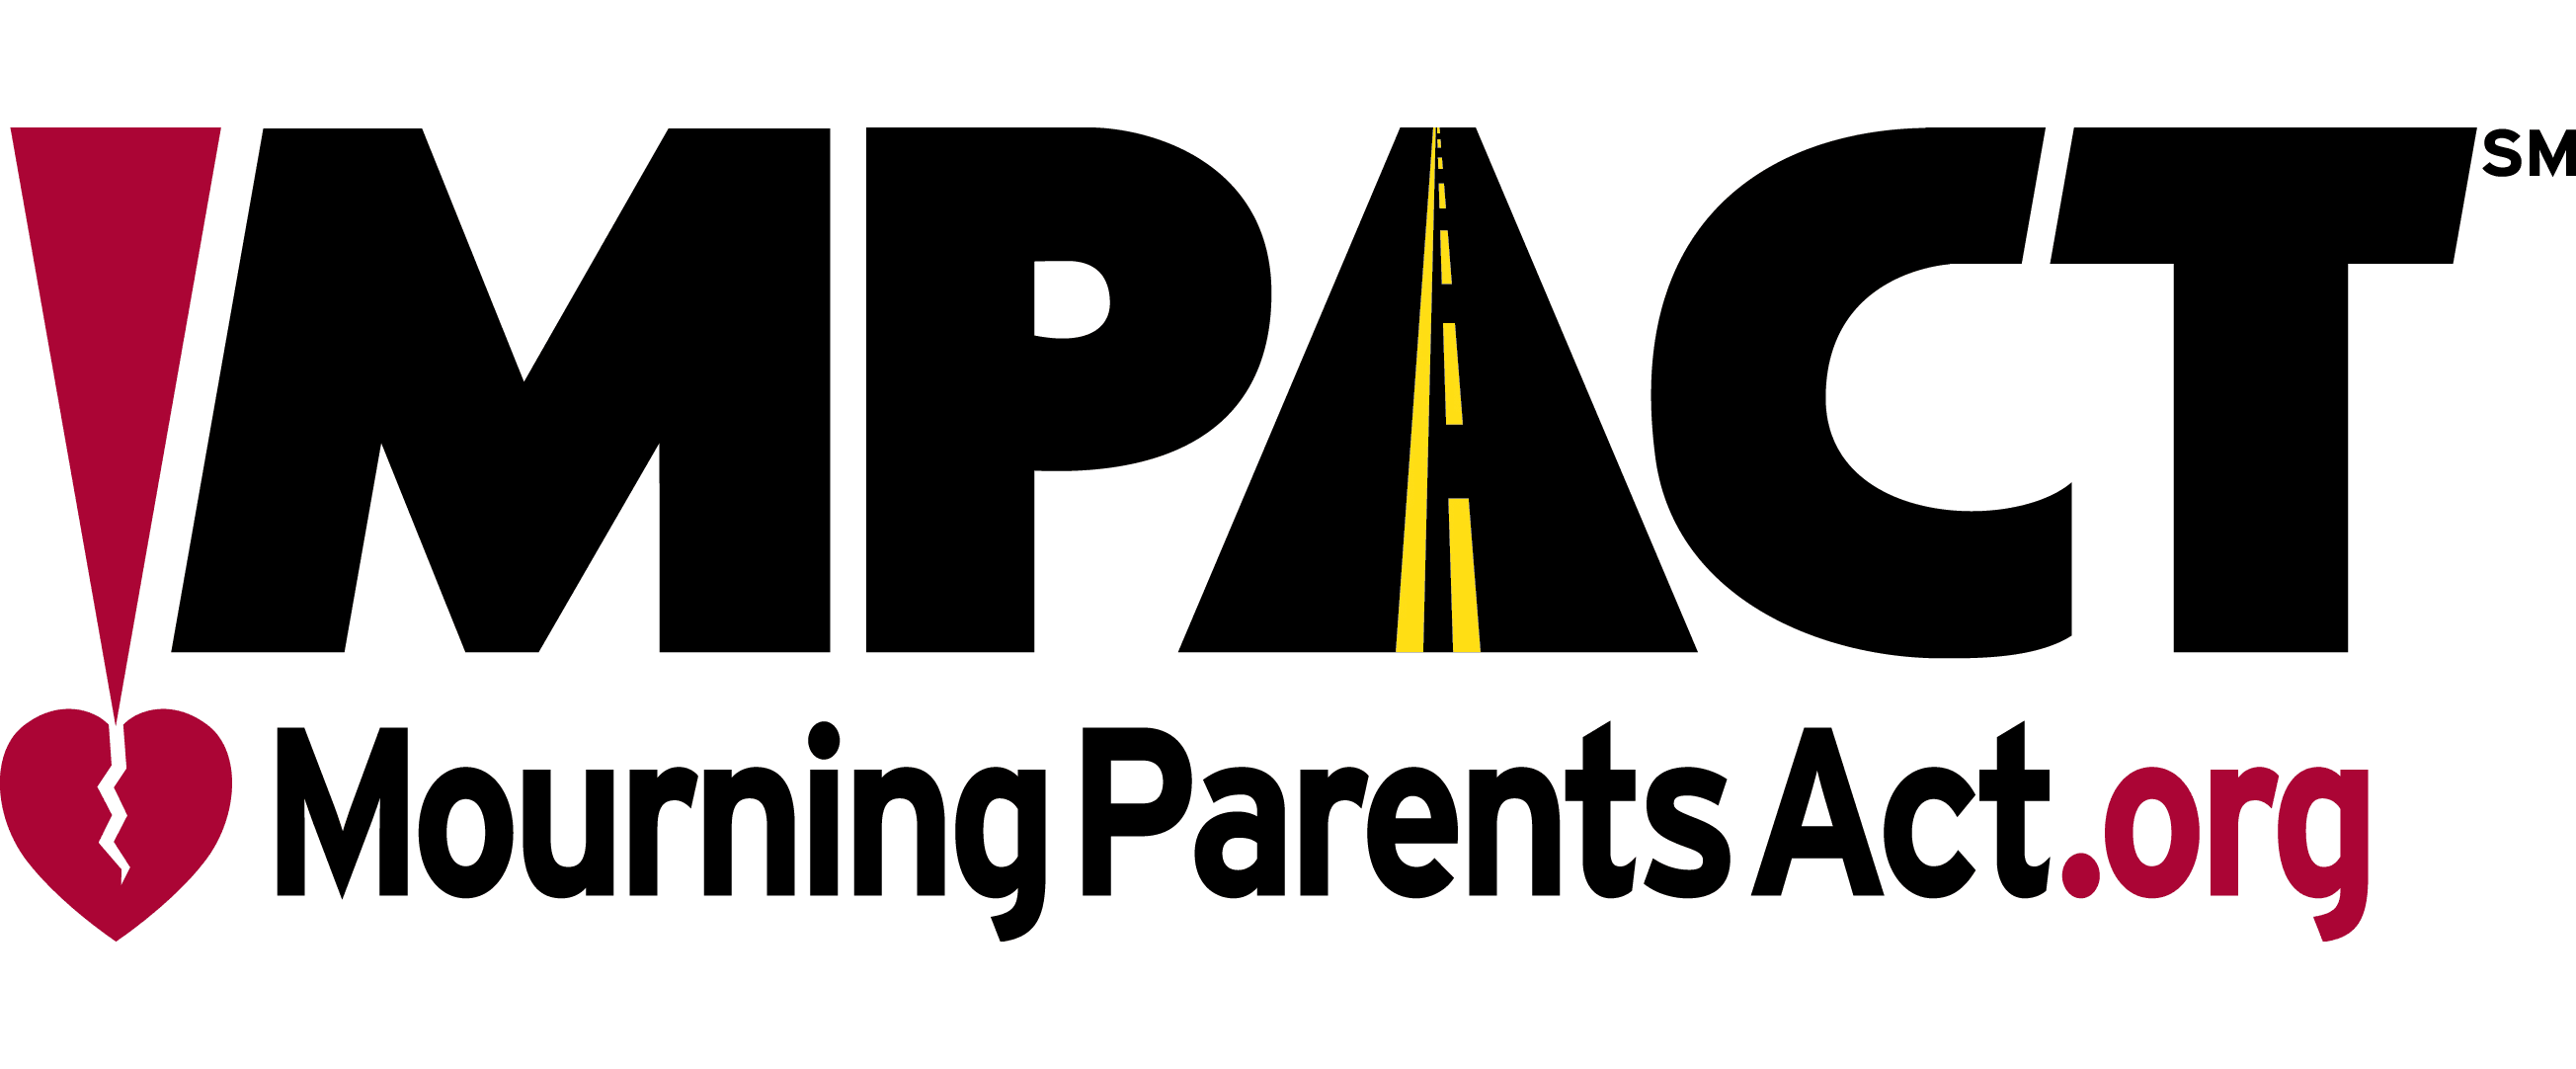 Mourning Parents ACT, Inc.